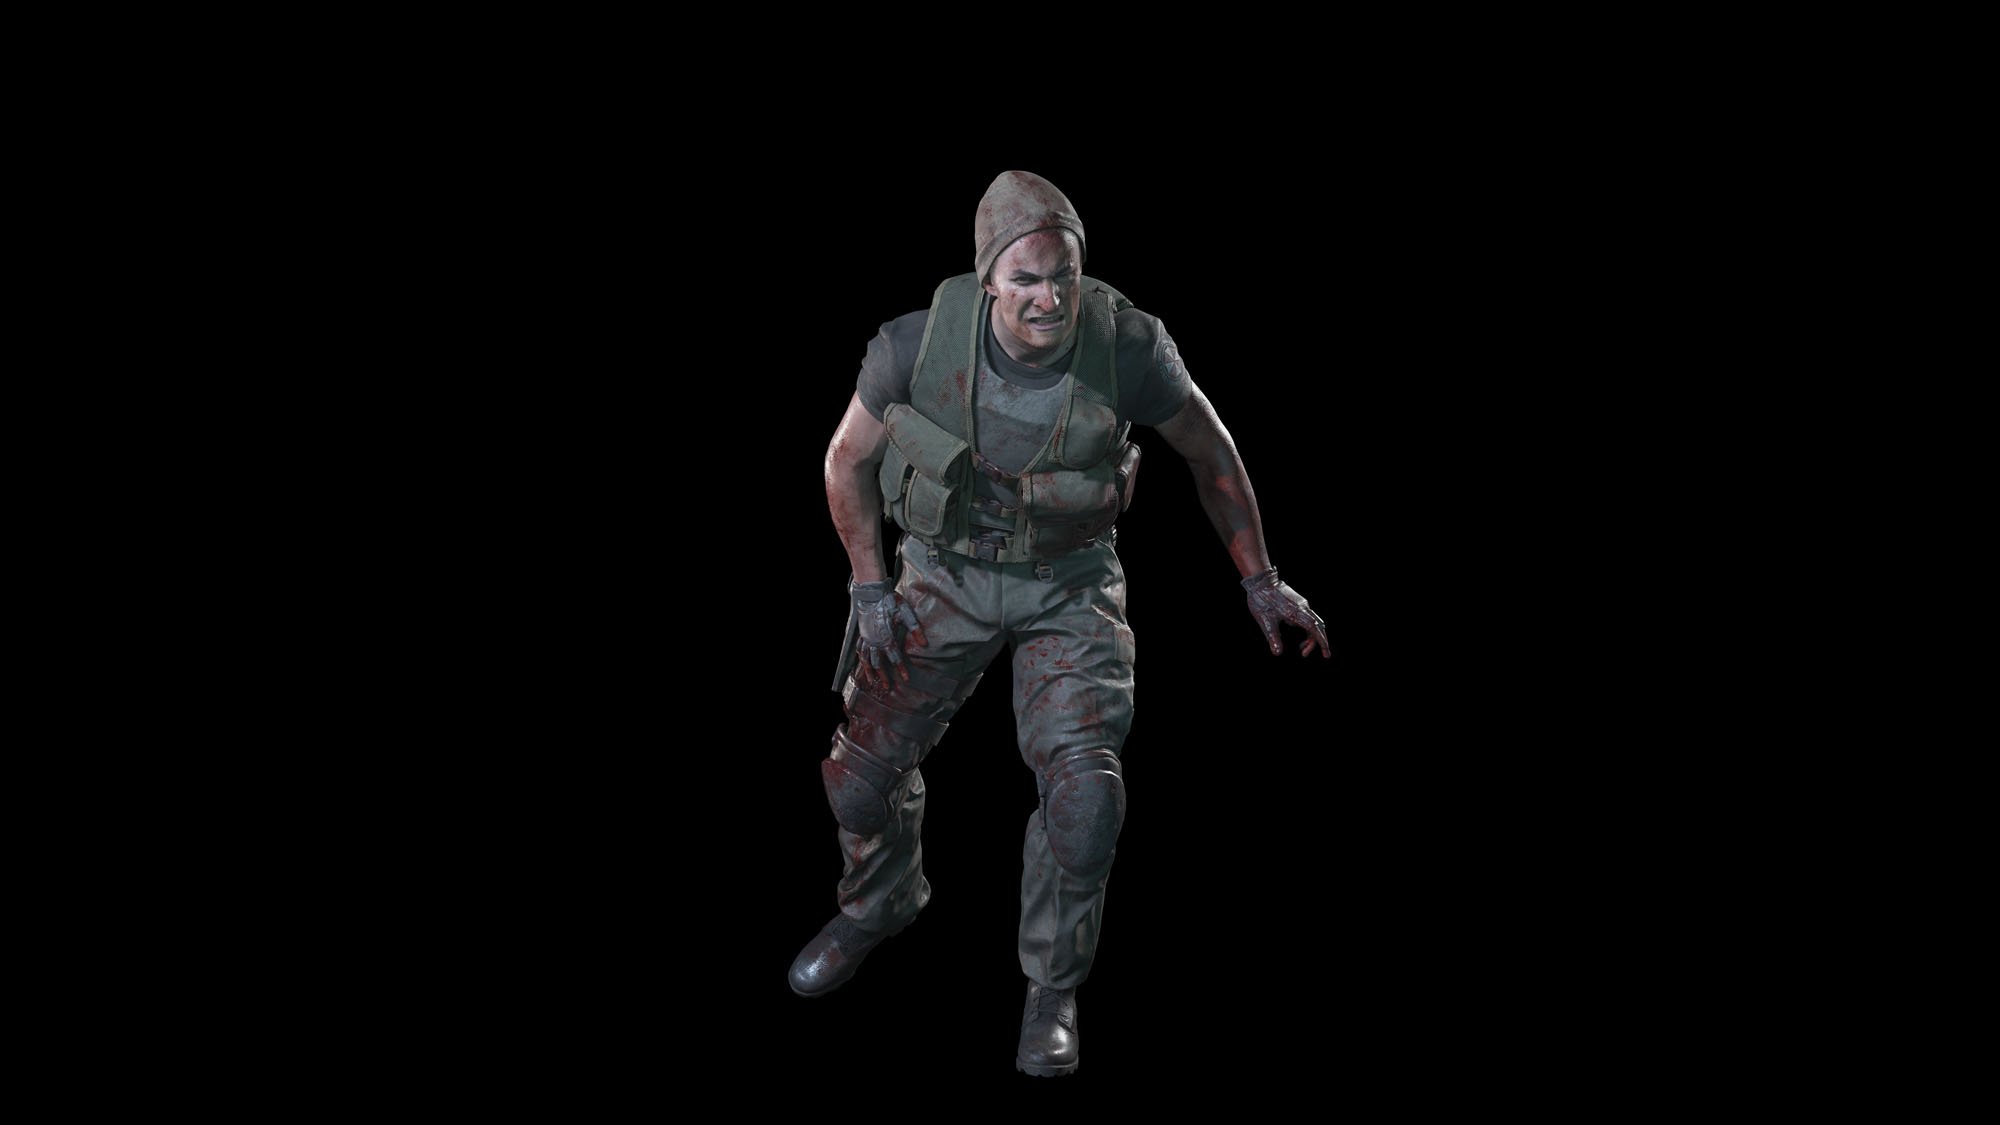 RE3_Character_Murphy - Daily Dead.